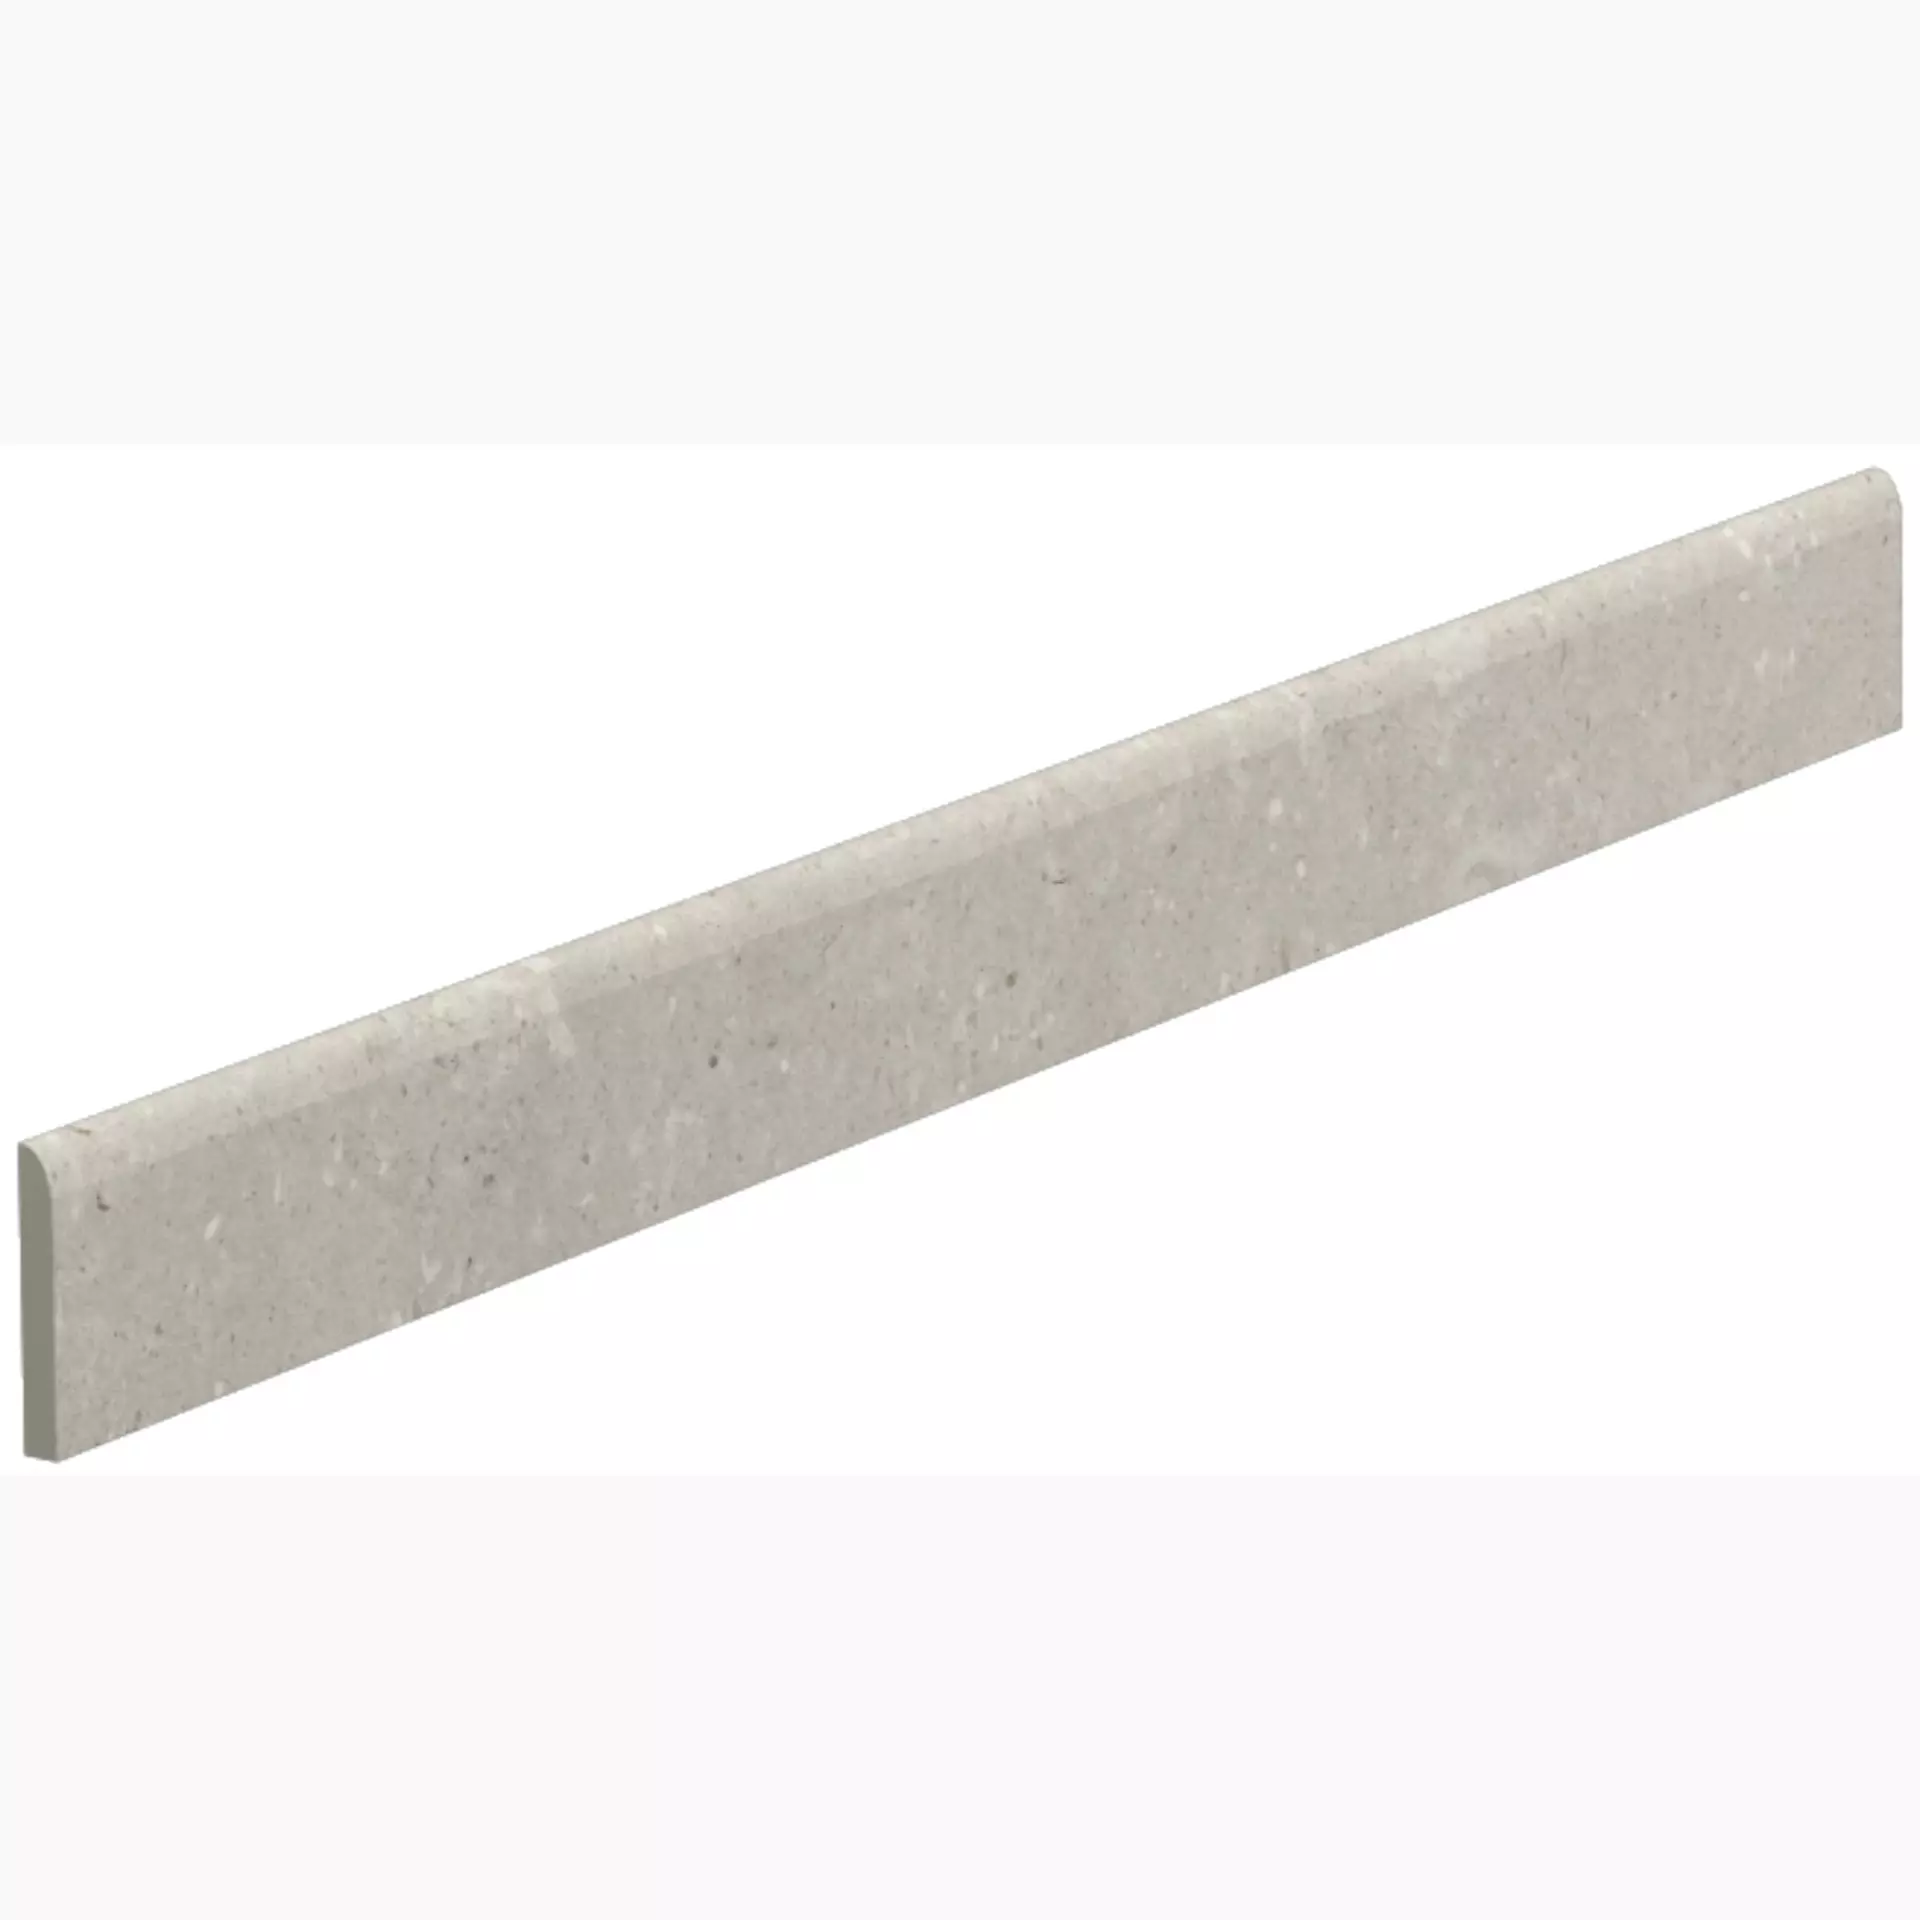 Del Conca Hwd Wild Grey Hwd05 Naturale Skirting board G0WD05R80 7x80cm rectified 8,5mm